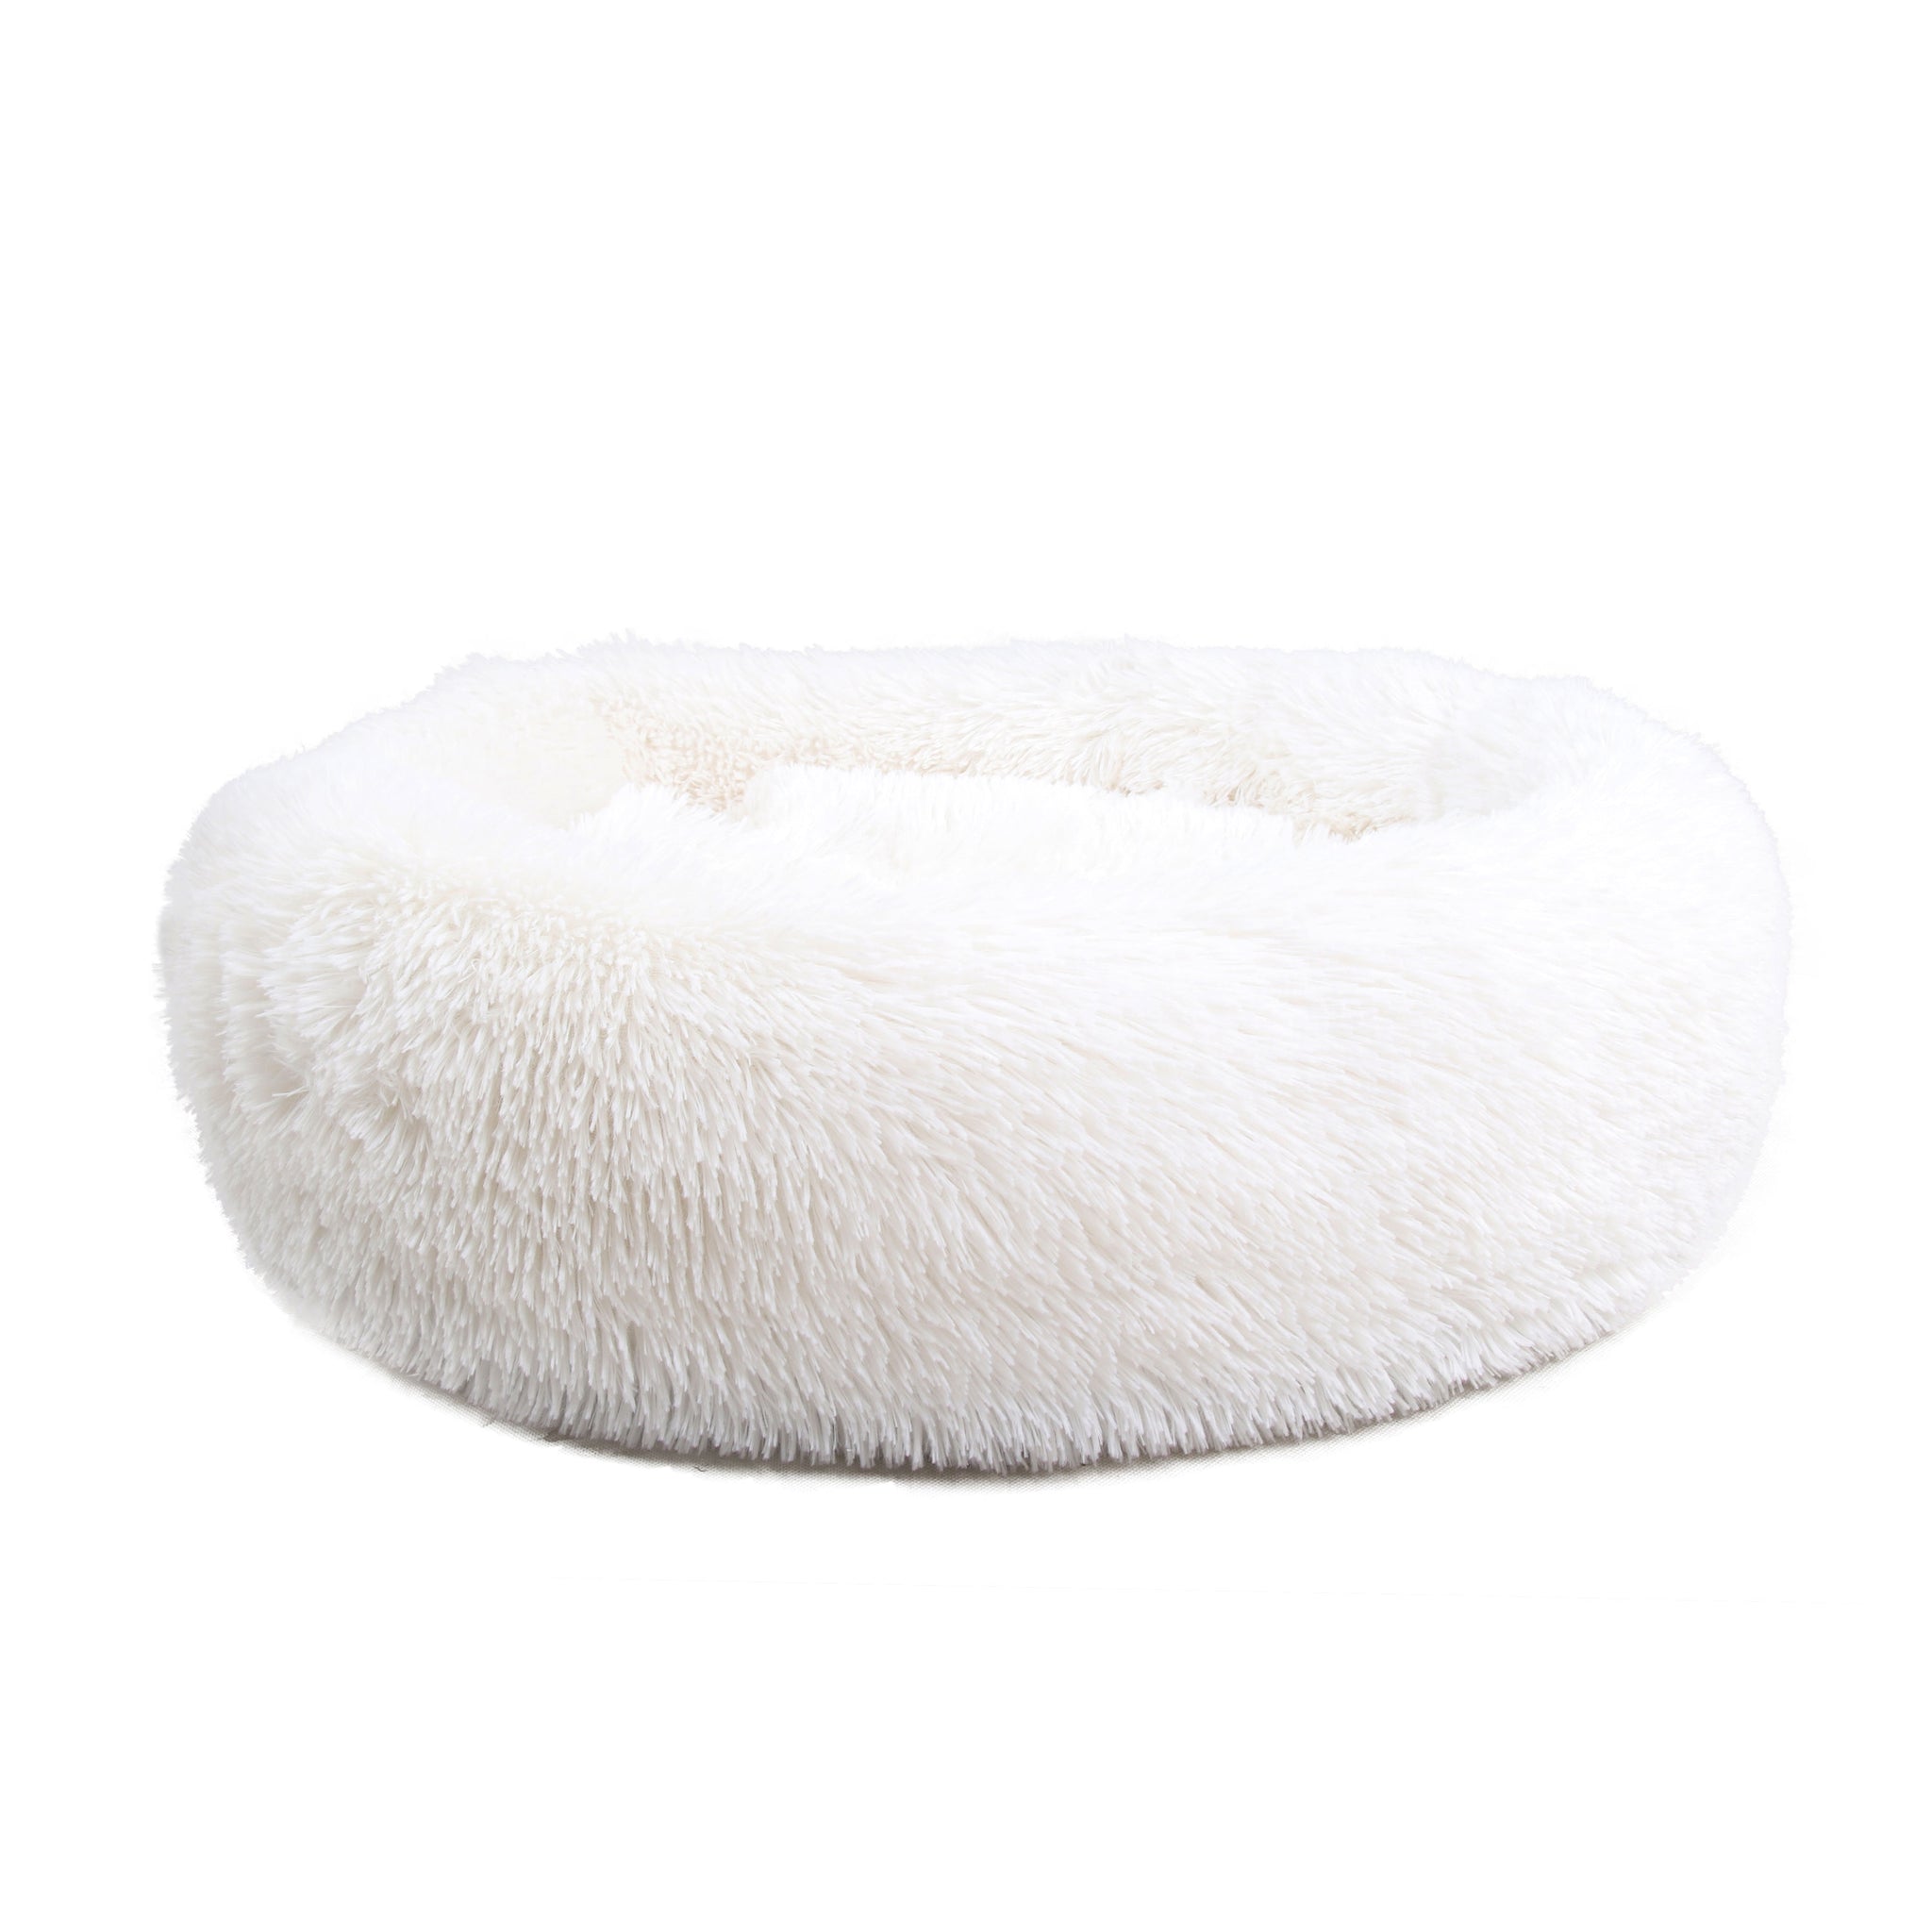 PetPrime Soft Round Dog Bed Circle Fluffy Warm Washable Bed (White) For Pet